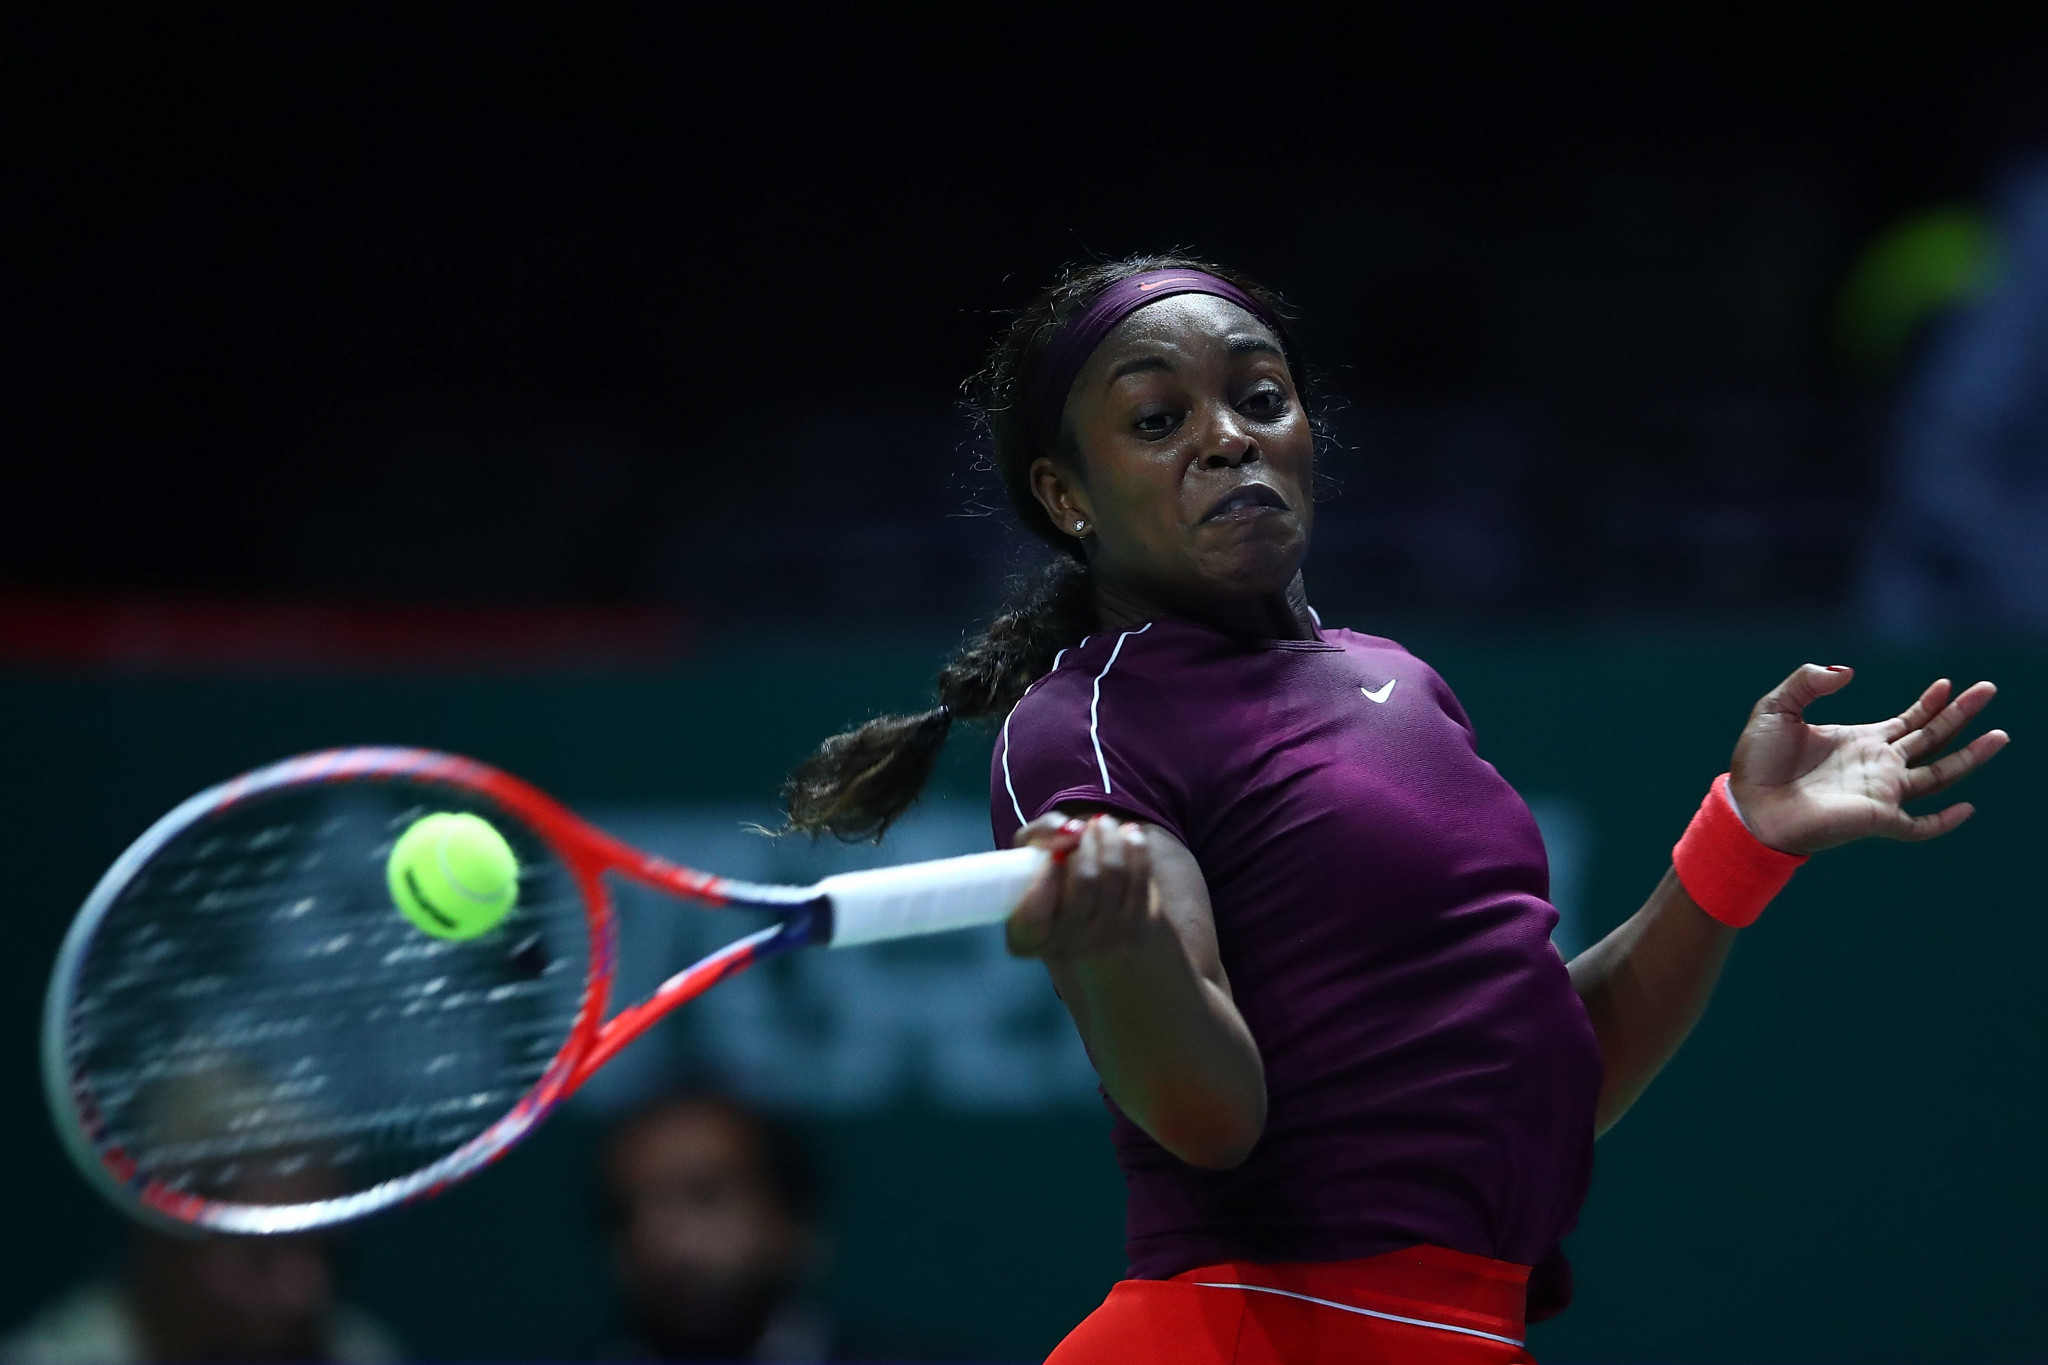 Sloane Stephens of the US beat Kiki Bertens of The Netherlands at the WTA Finals in Singapore ©Getty Images